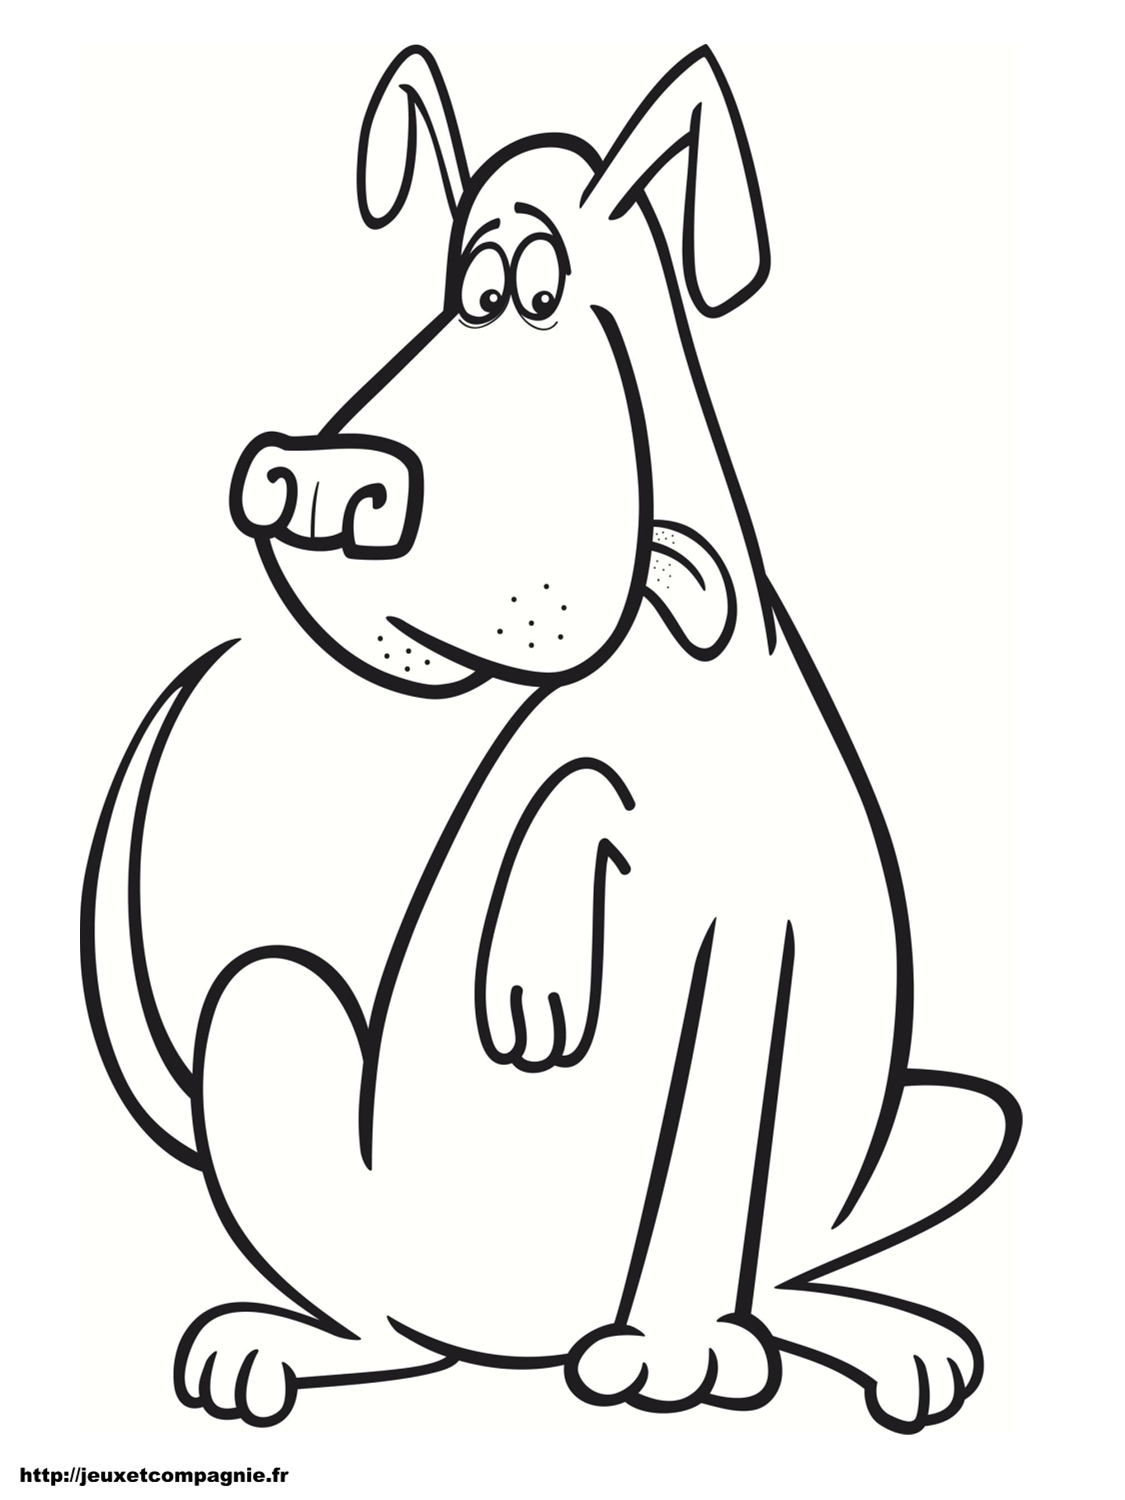 Funny dog to put in color